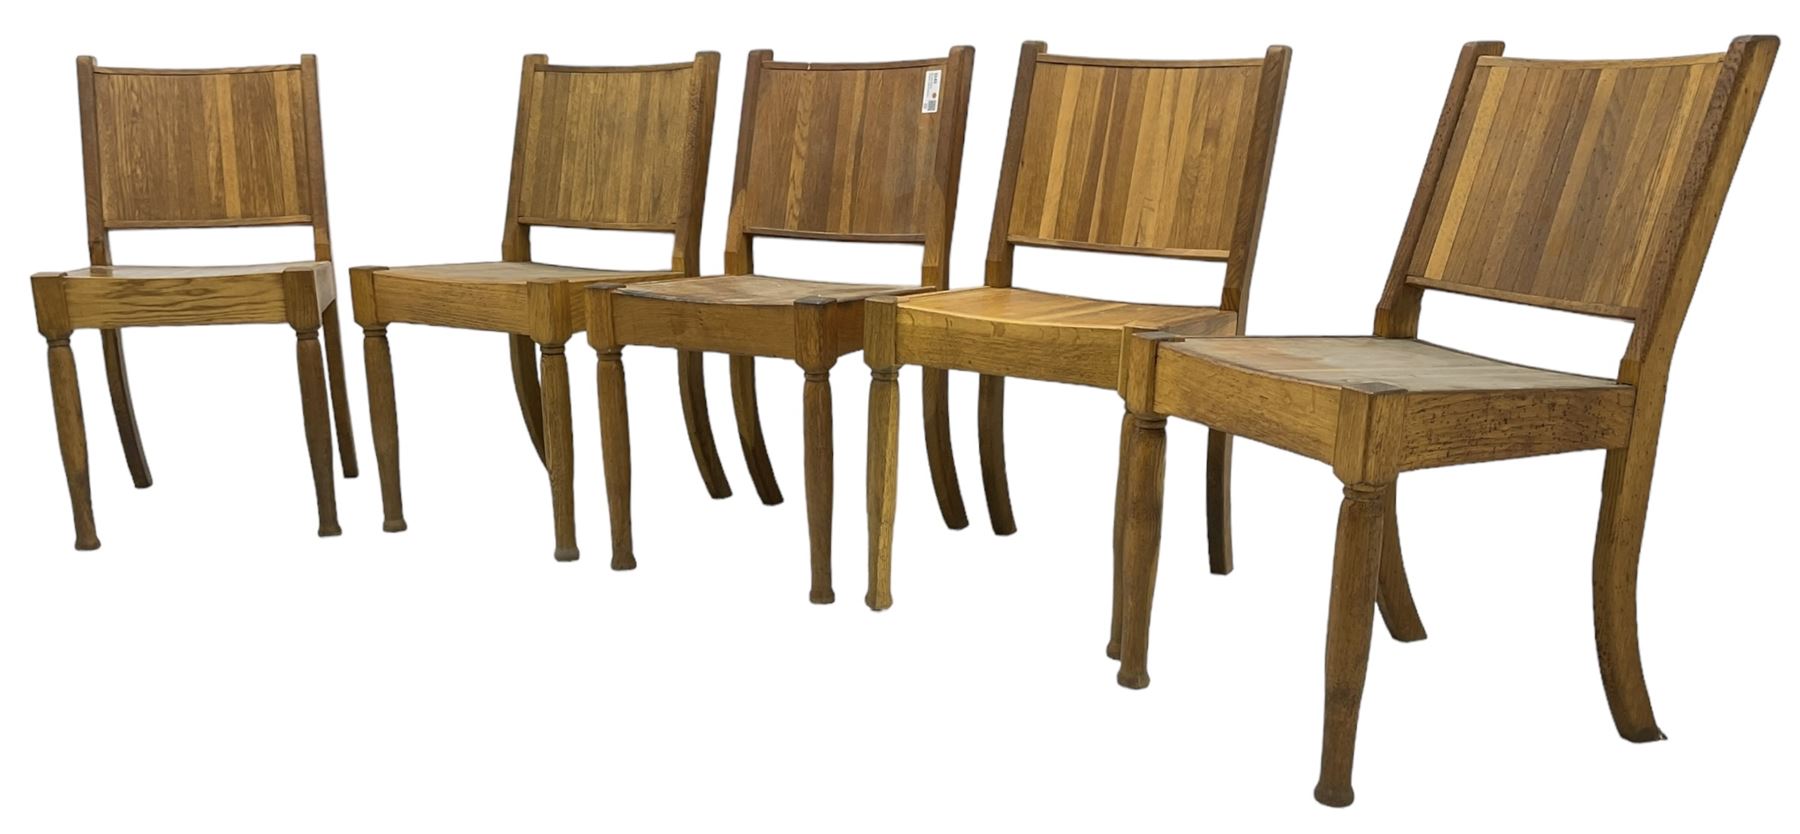 Set of five 20th century oak chairs - Image 3 of 6